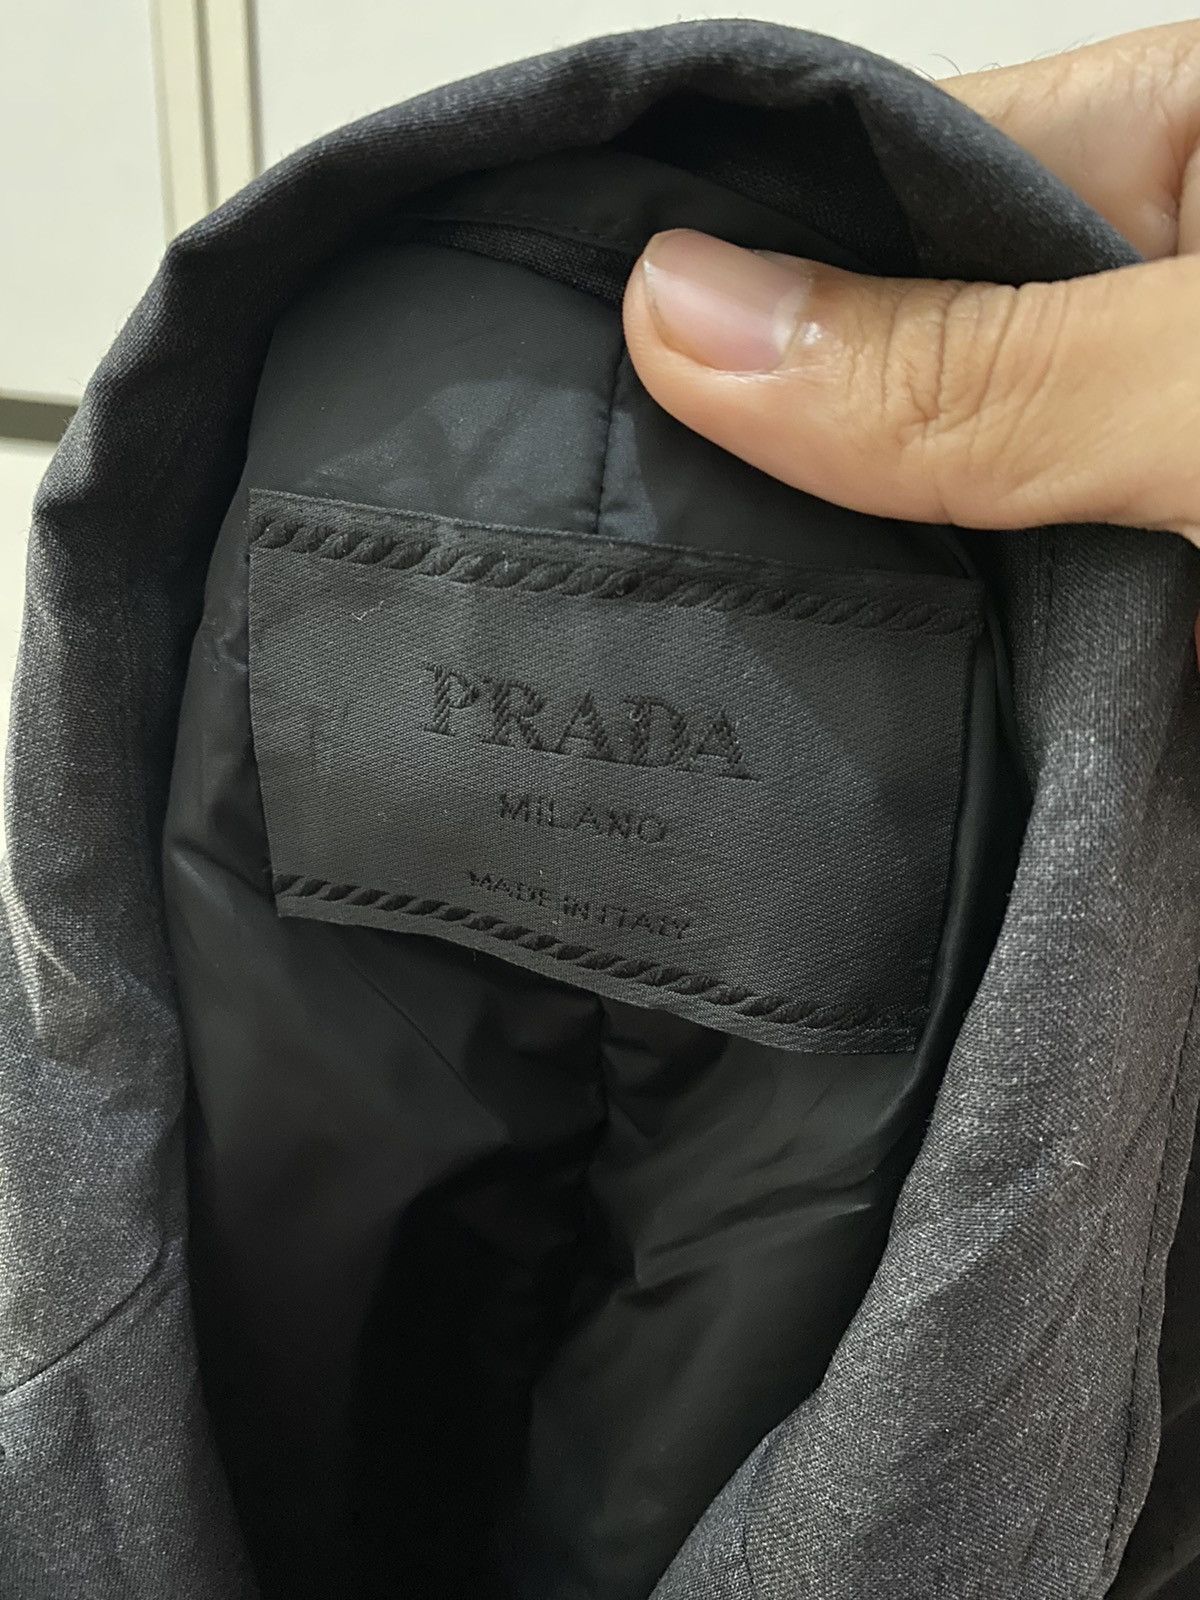 Prada Trench Coat Wool Padded Jacket Perfect Condition - 11